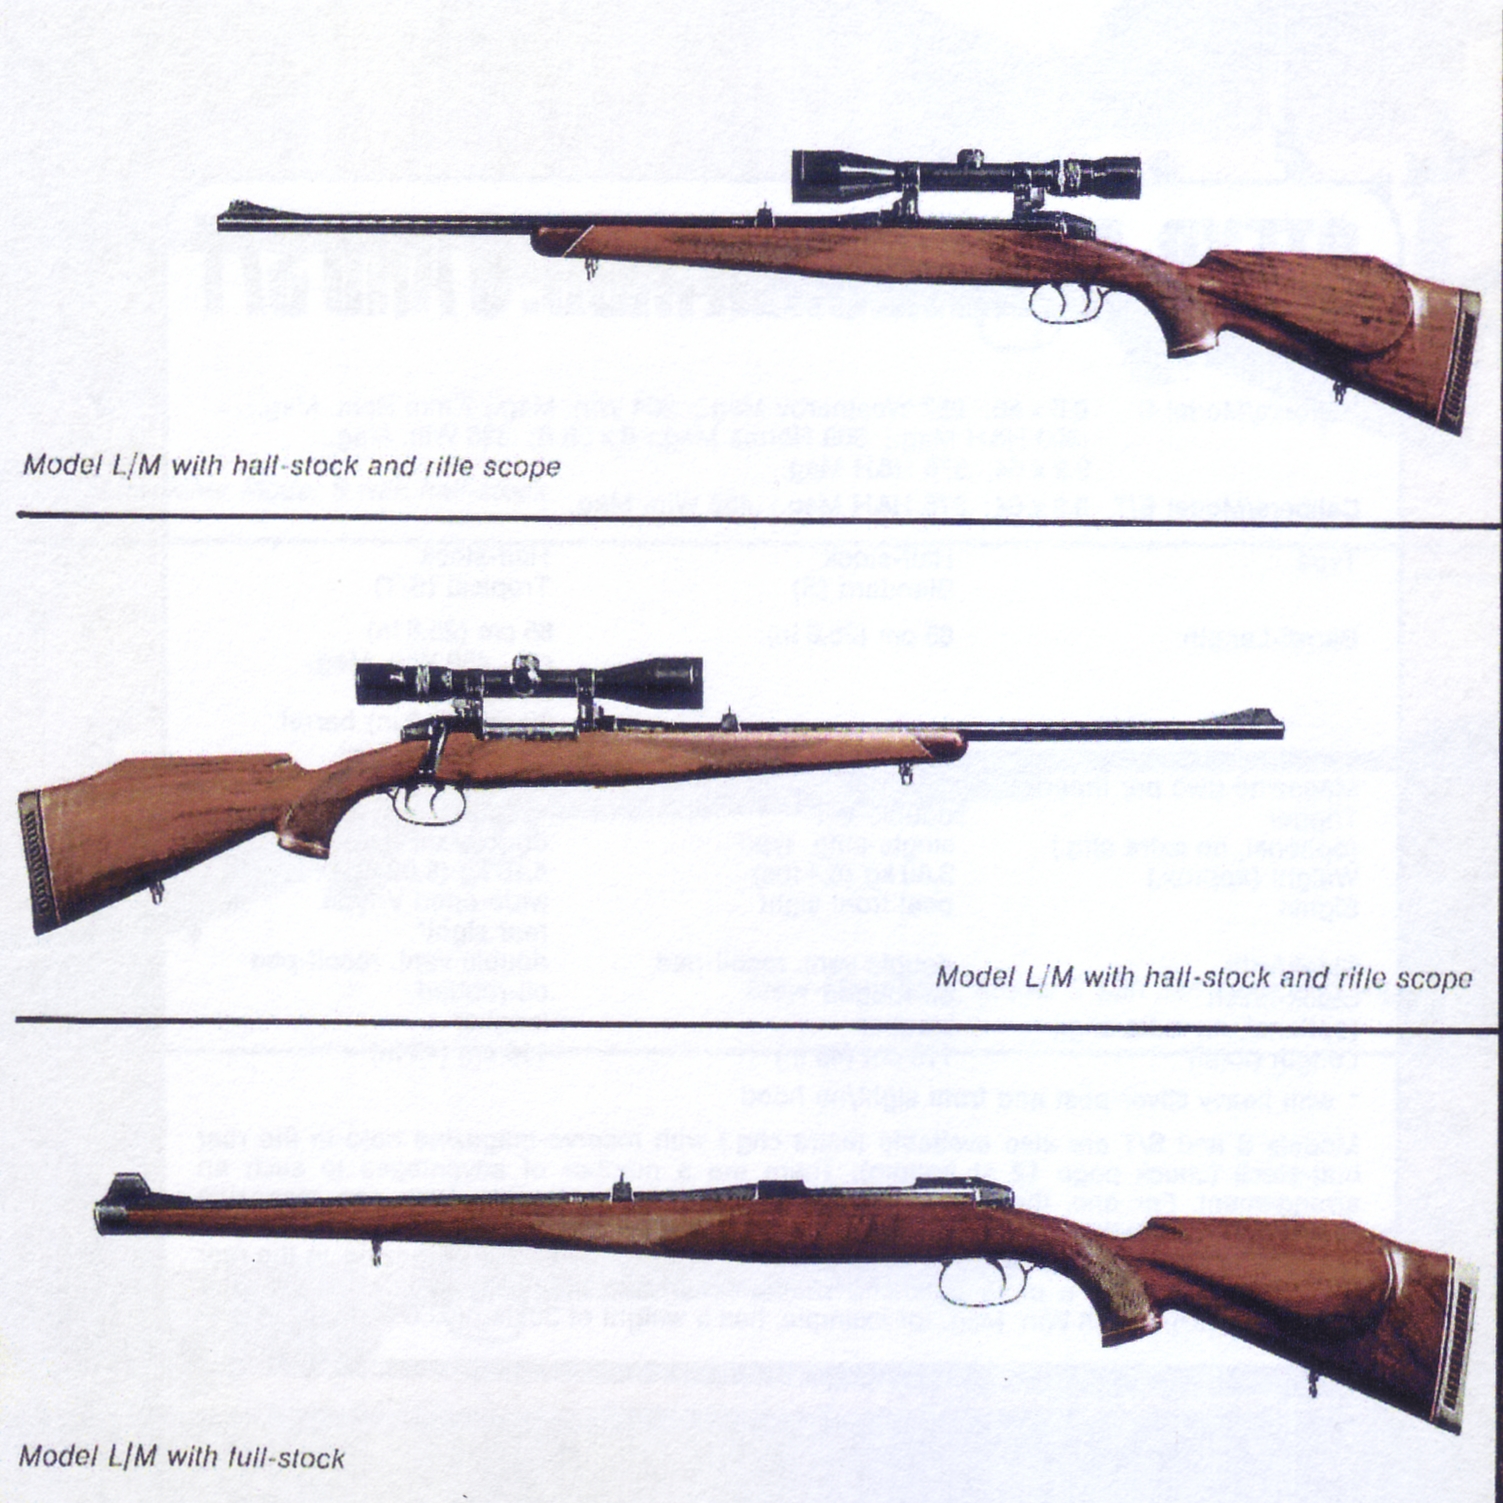 The Mannlicher-Schönauer M72 Model L/M stock style options. (Picture from the original Steyr catalog and courtesy of Steyr.)